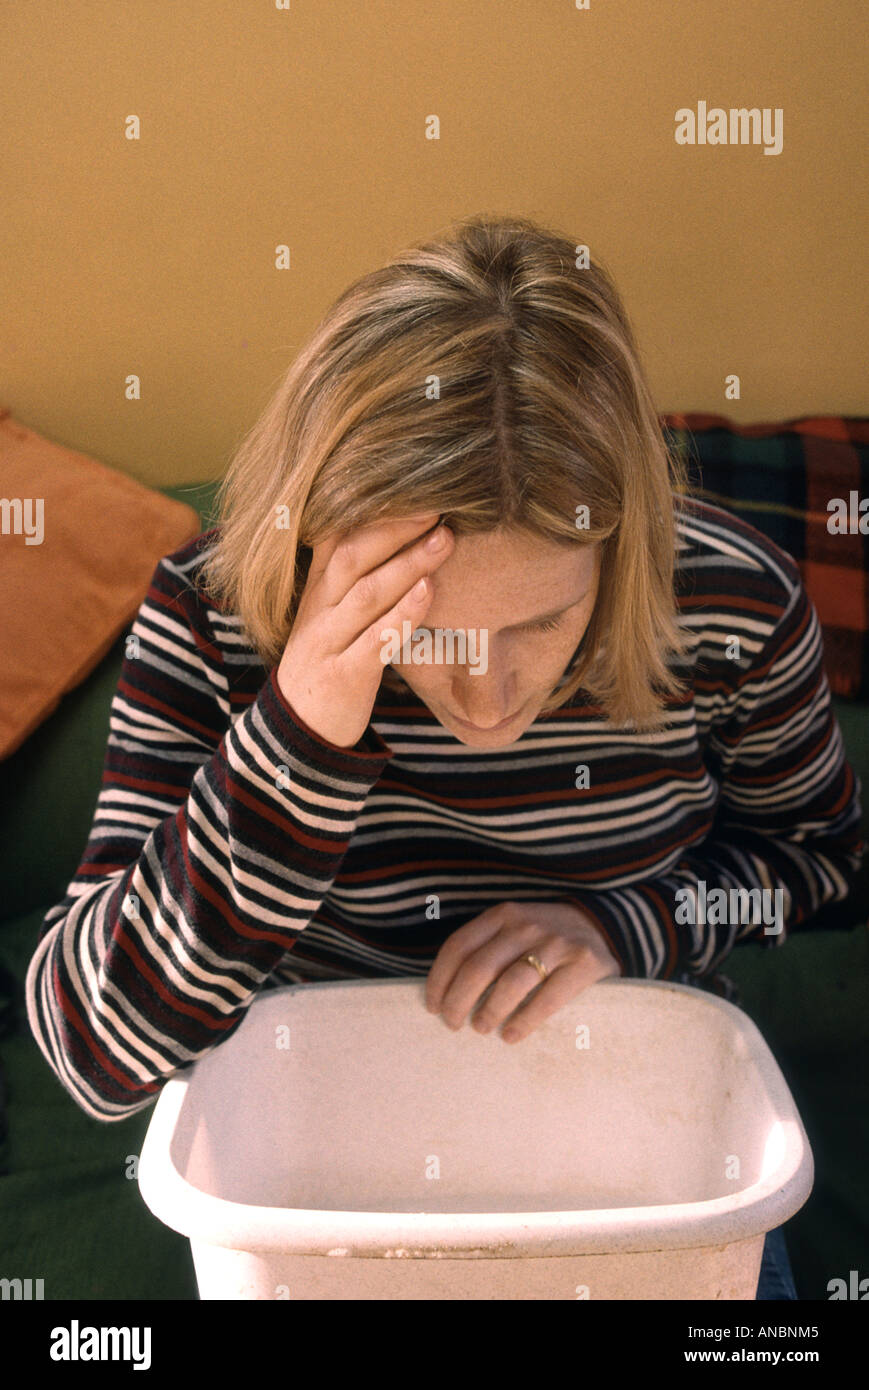 pregnant woman in her first trimester suffering from morning sickness Stock Photo